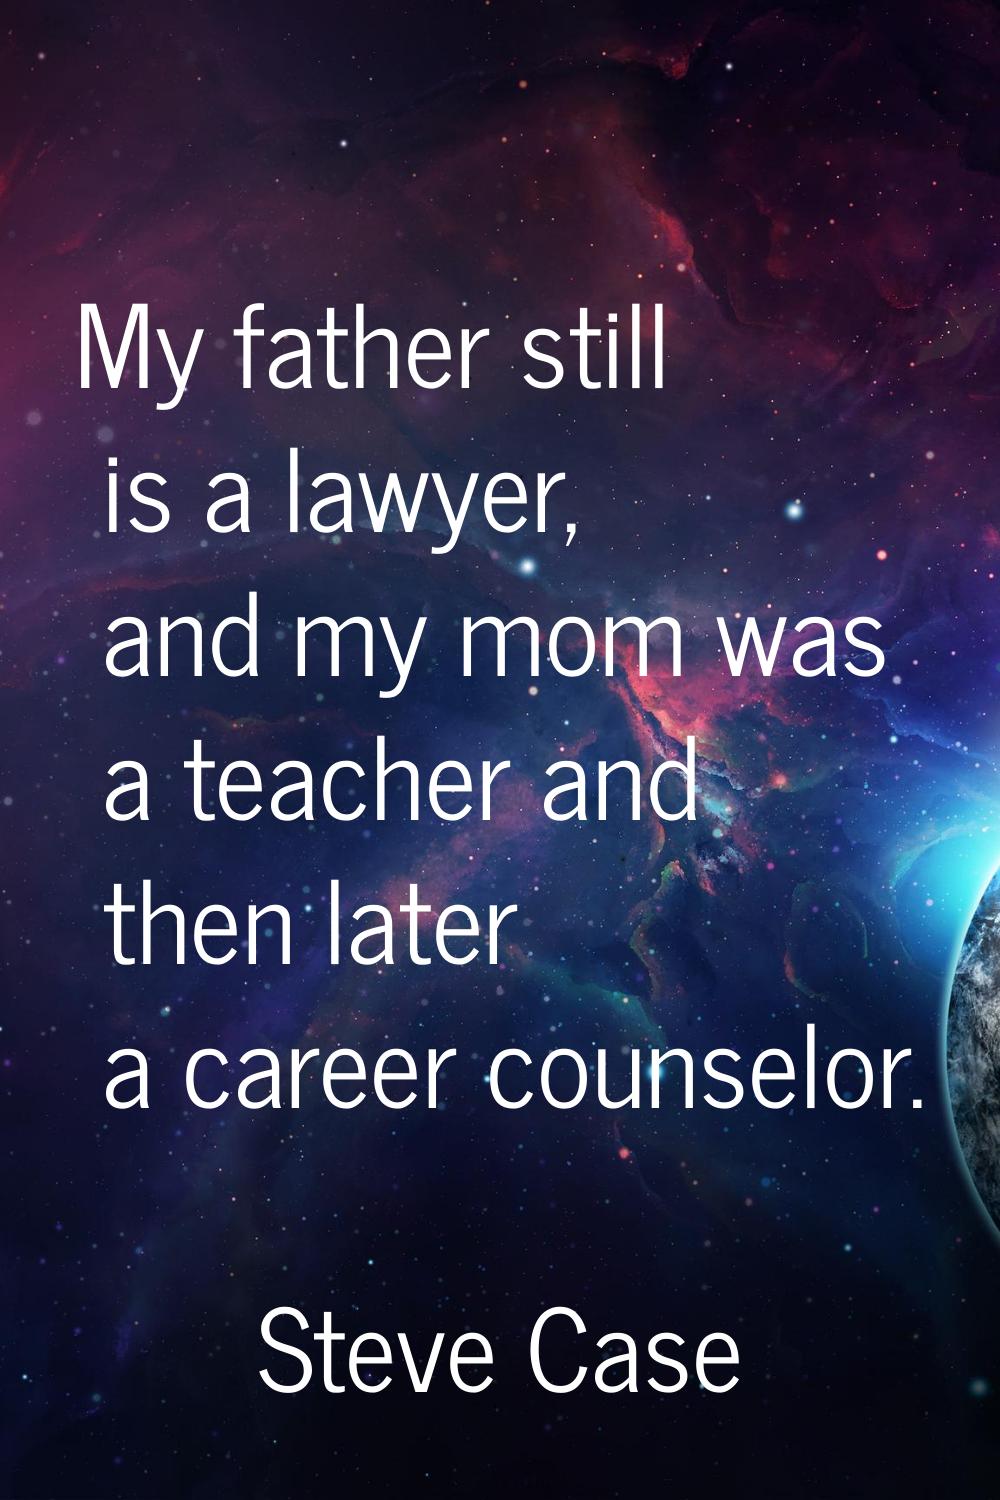 My father still is a lawyer, and my mom was a teacher and then later a career counselor.